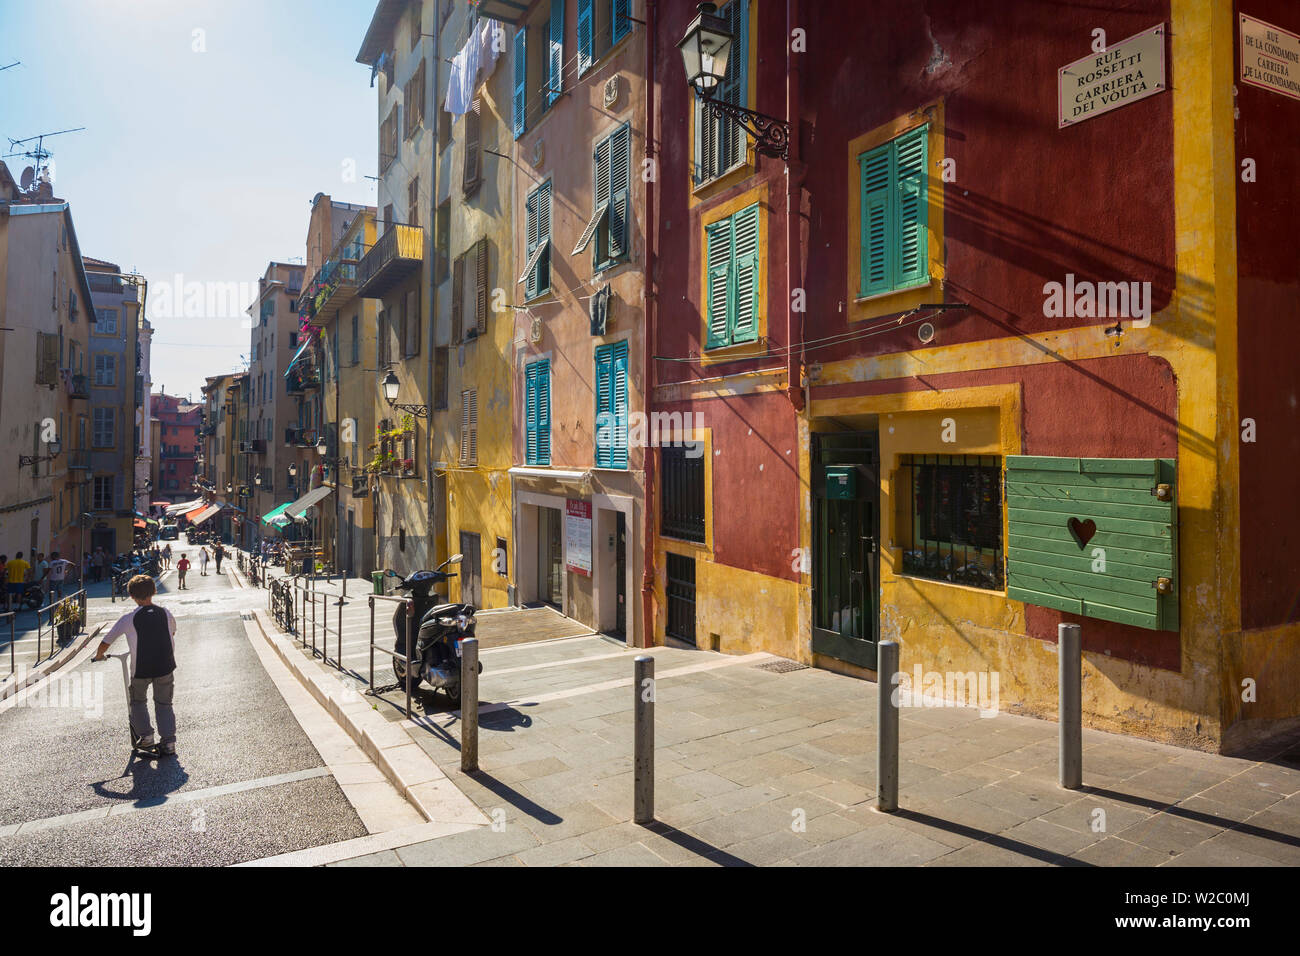 Old Town (Vieille Ville), Nice, Alpes-Maritimes, Provence-Alpes-Cote D'Azur, French Riviera, France Stock Photo